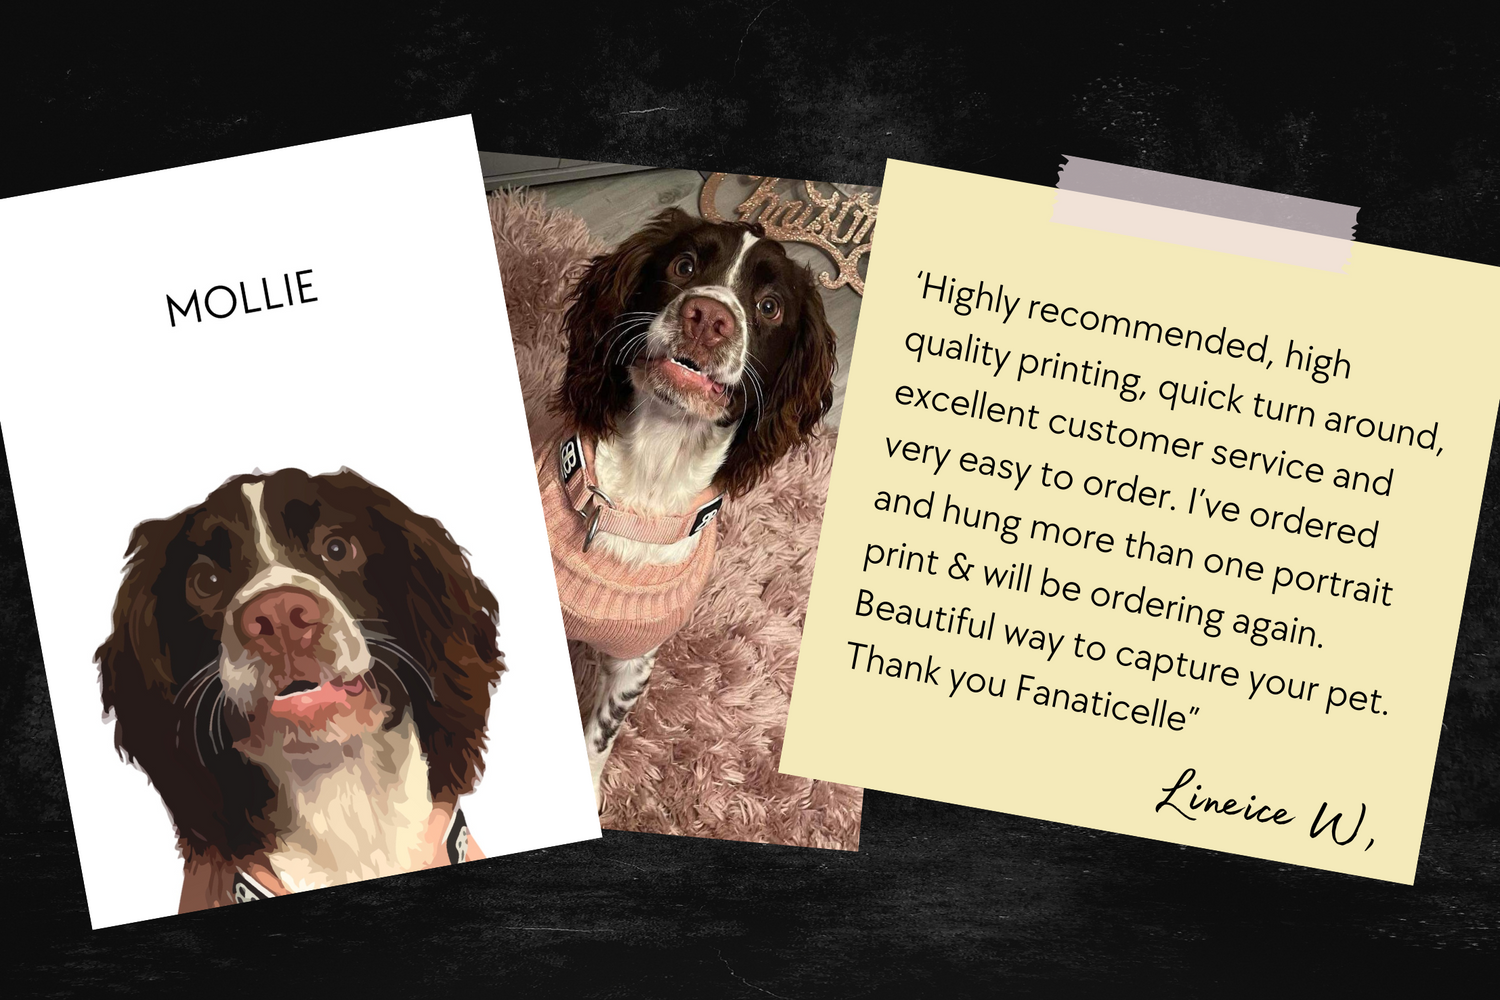 A customer feedback comment from a very happy customer of Fanaticelle. 